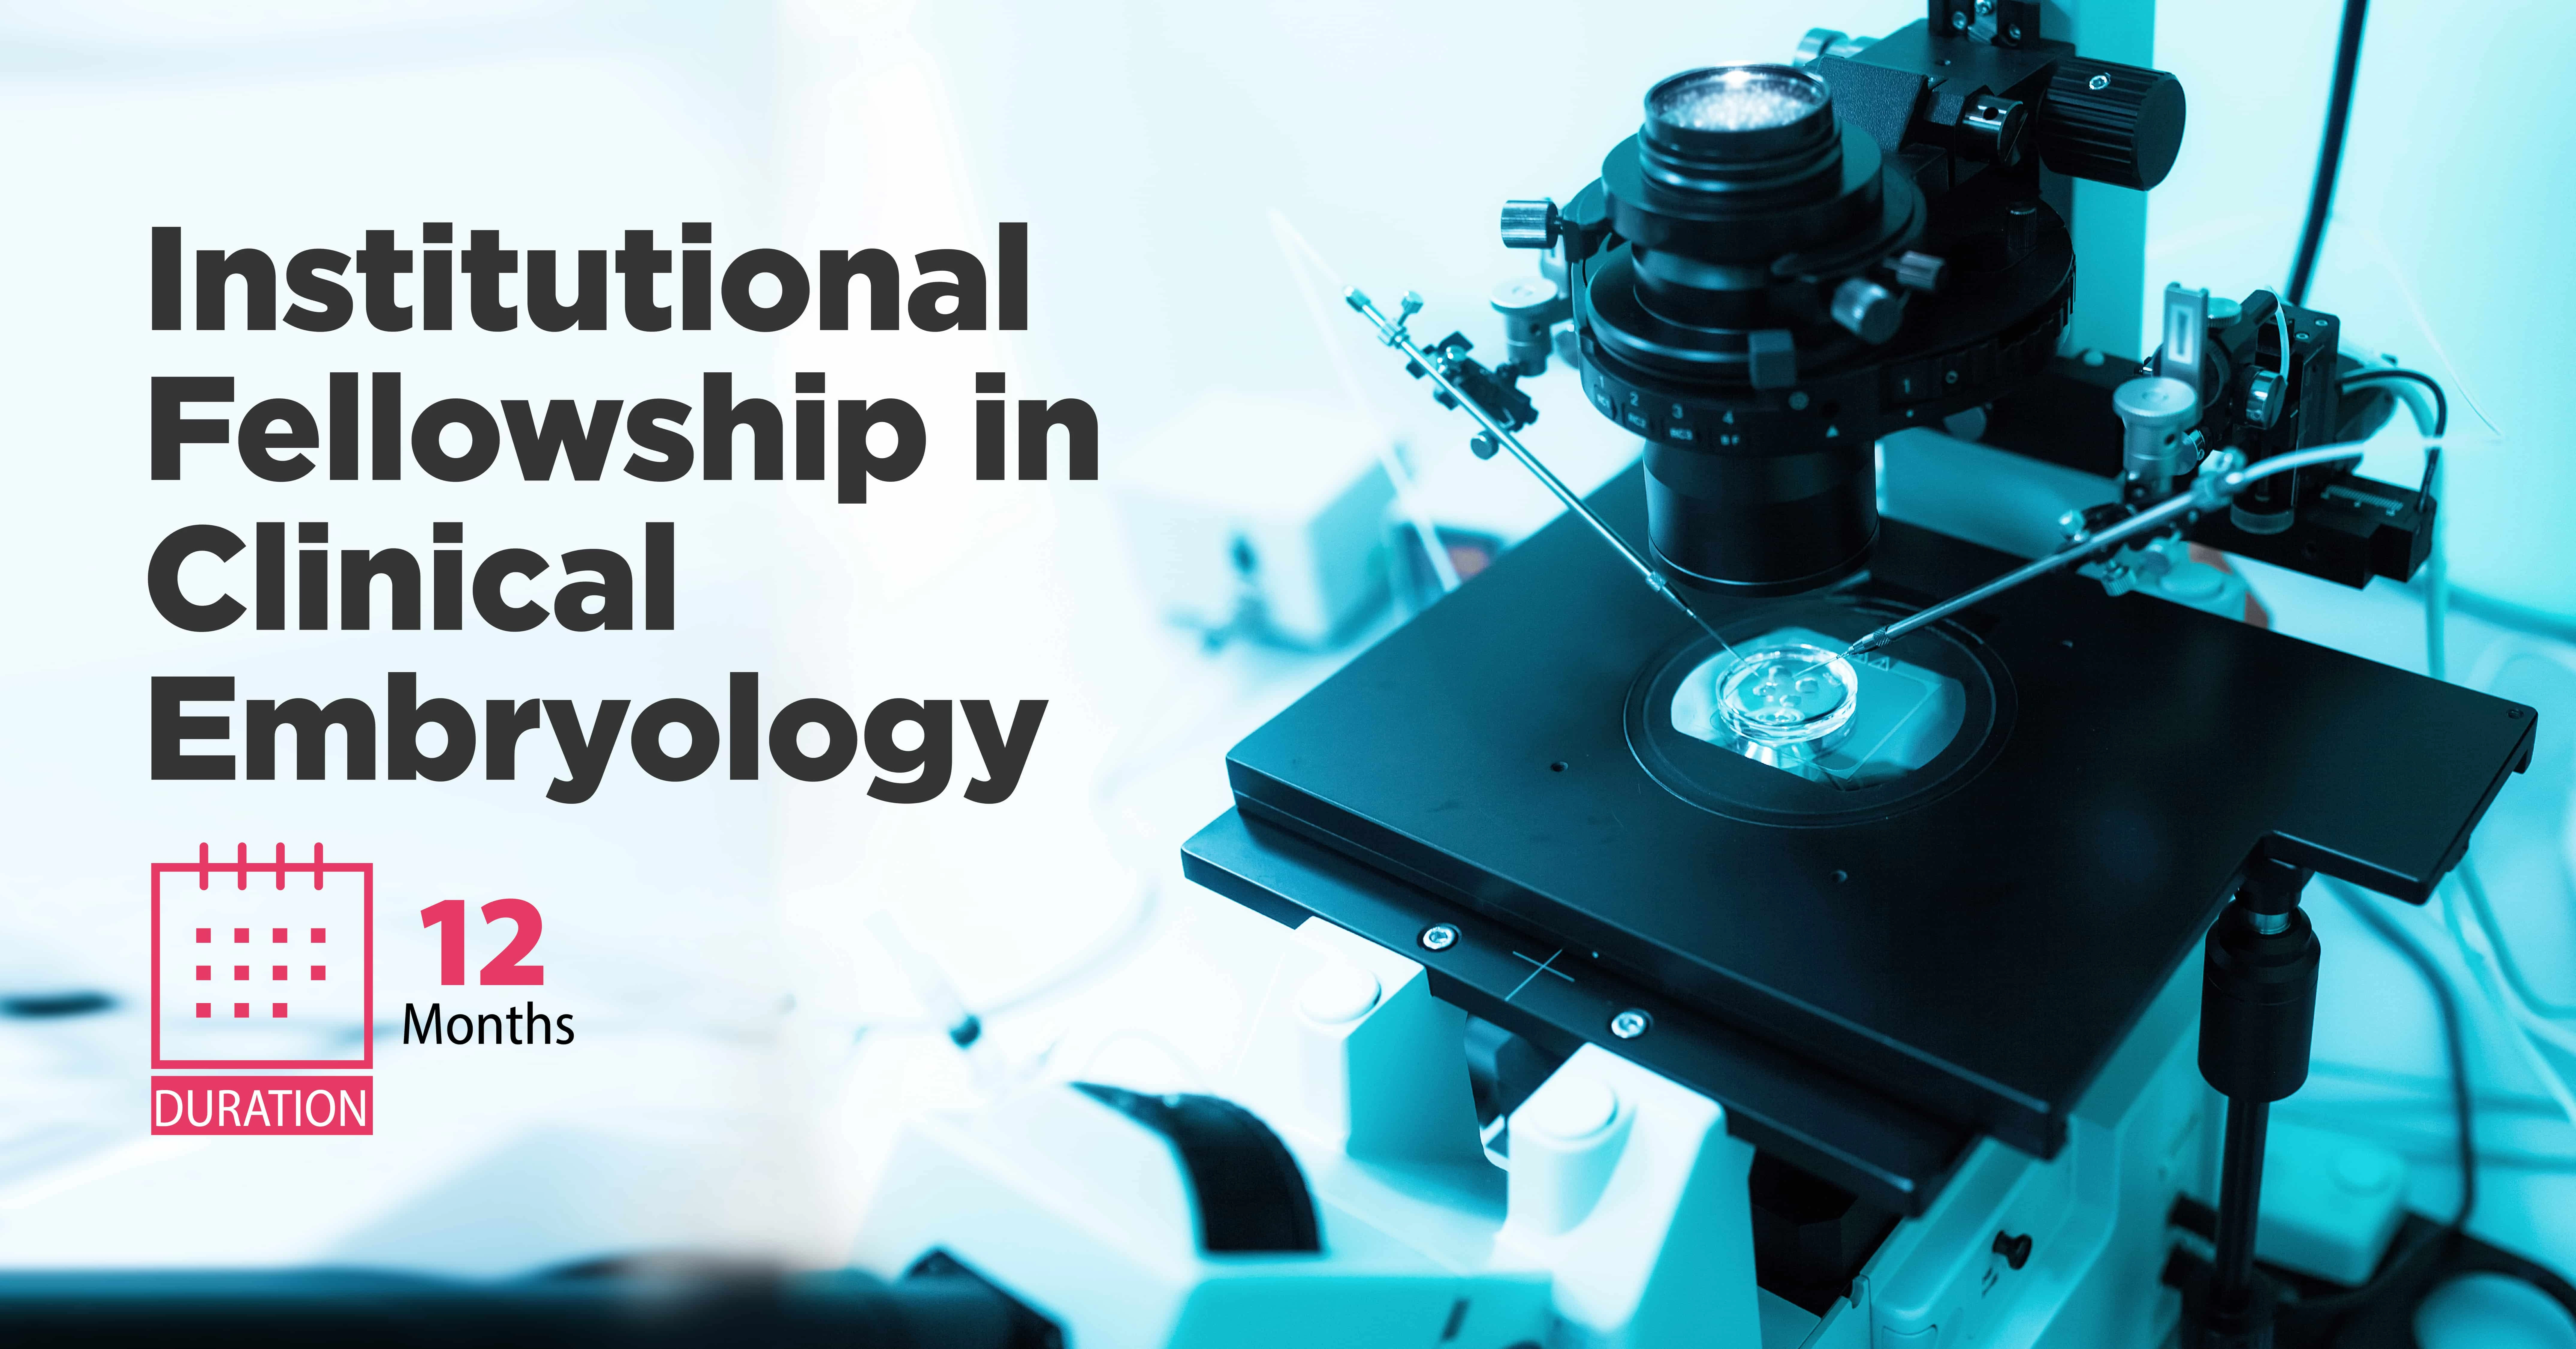 Institutional Fellowship in Clinical Embryology